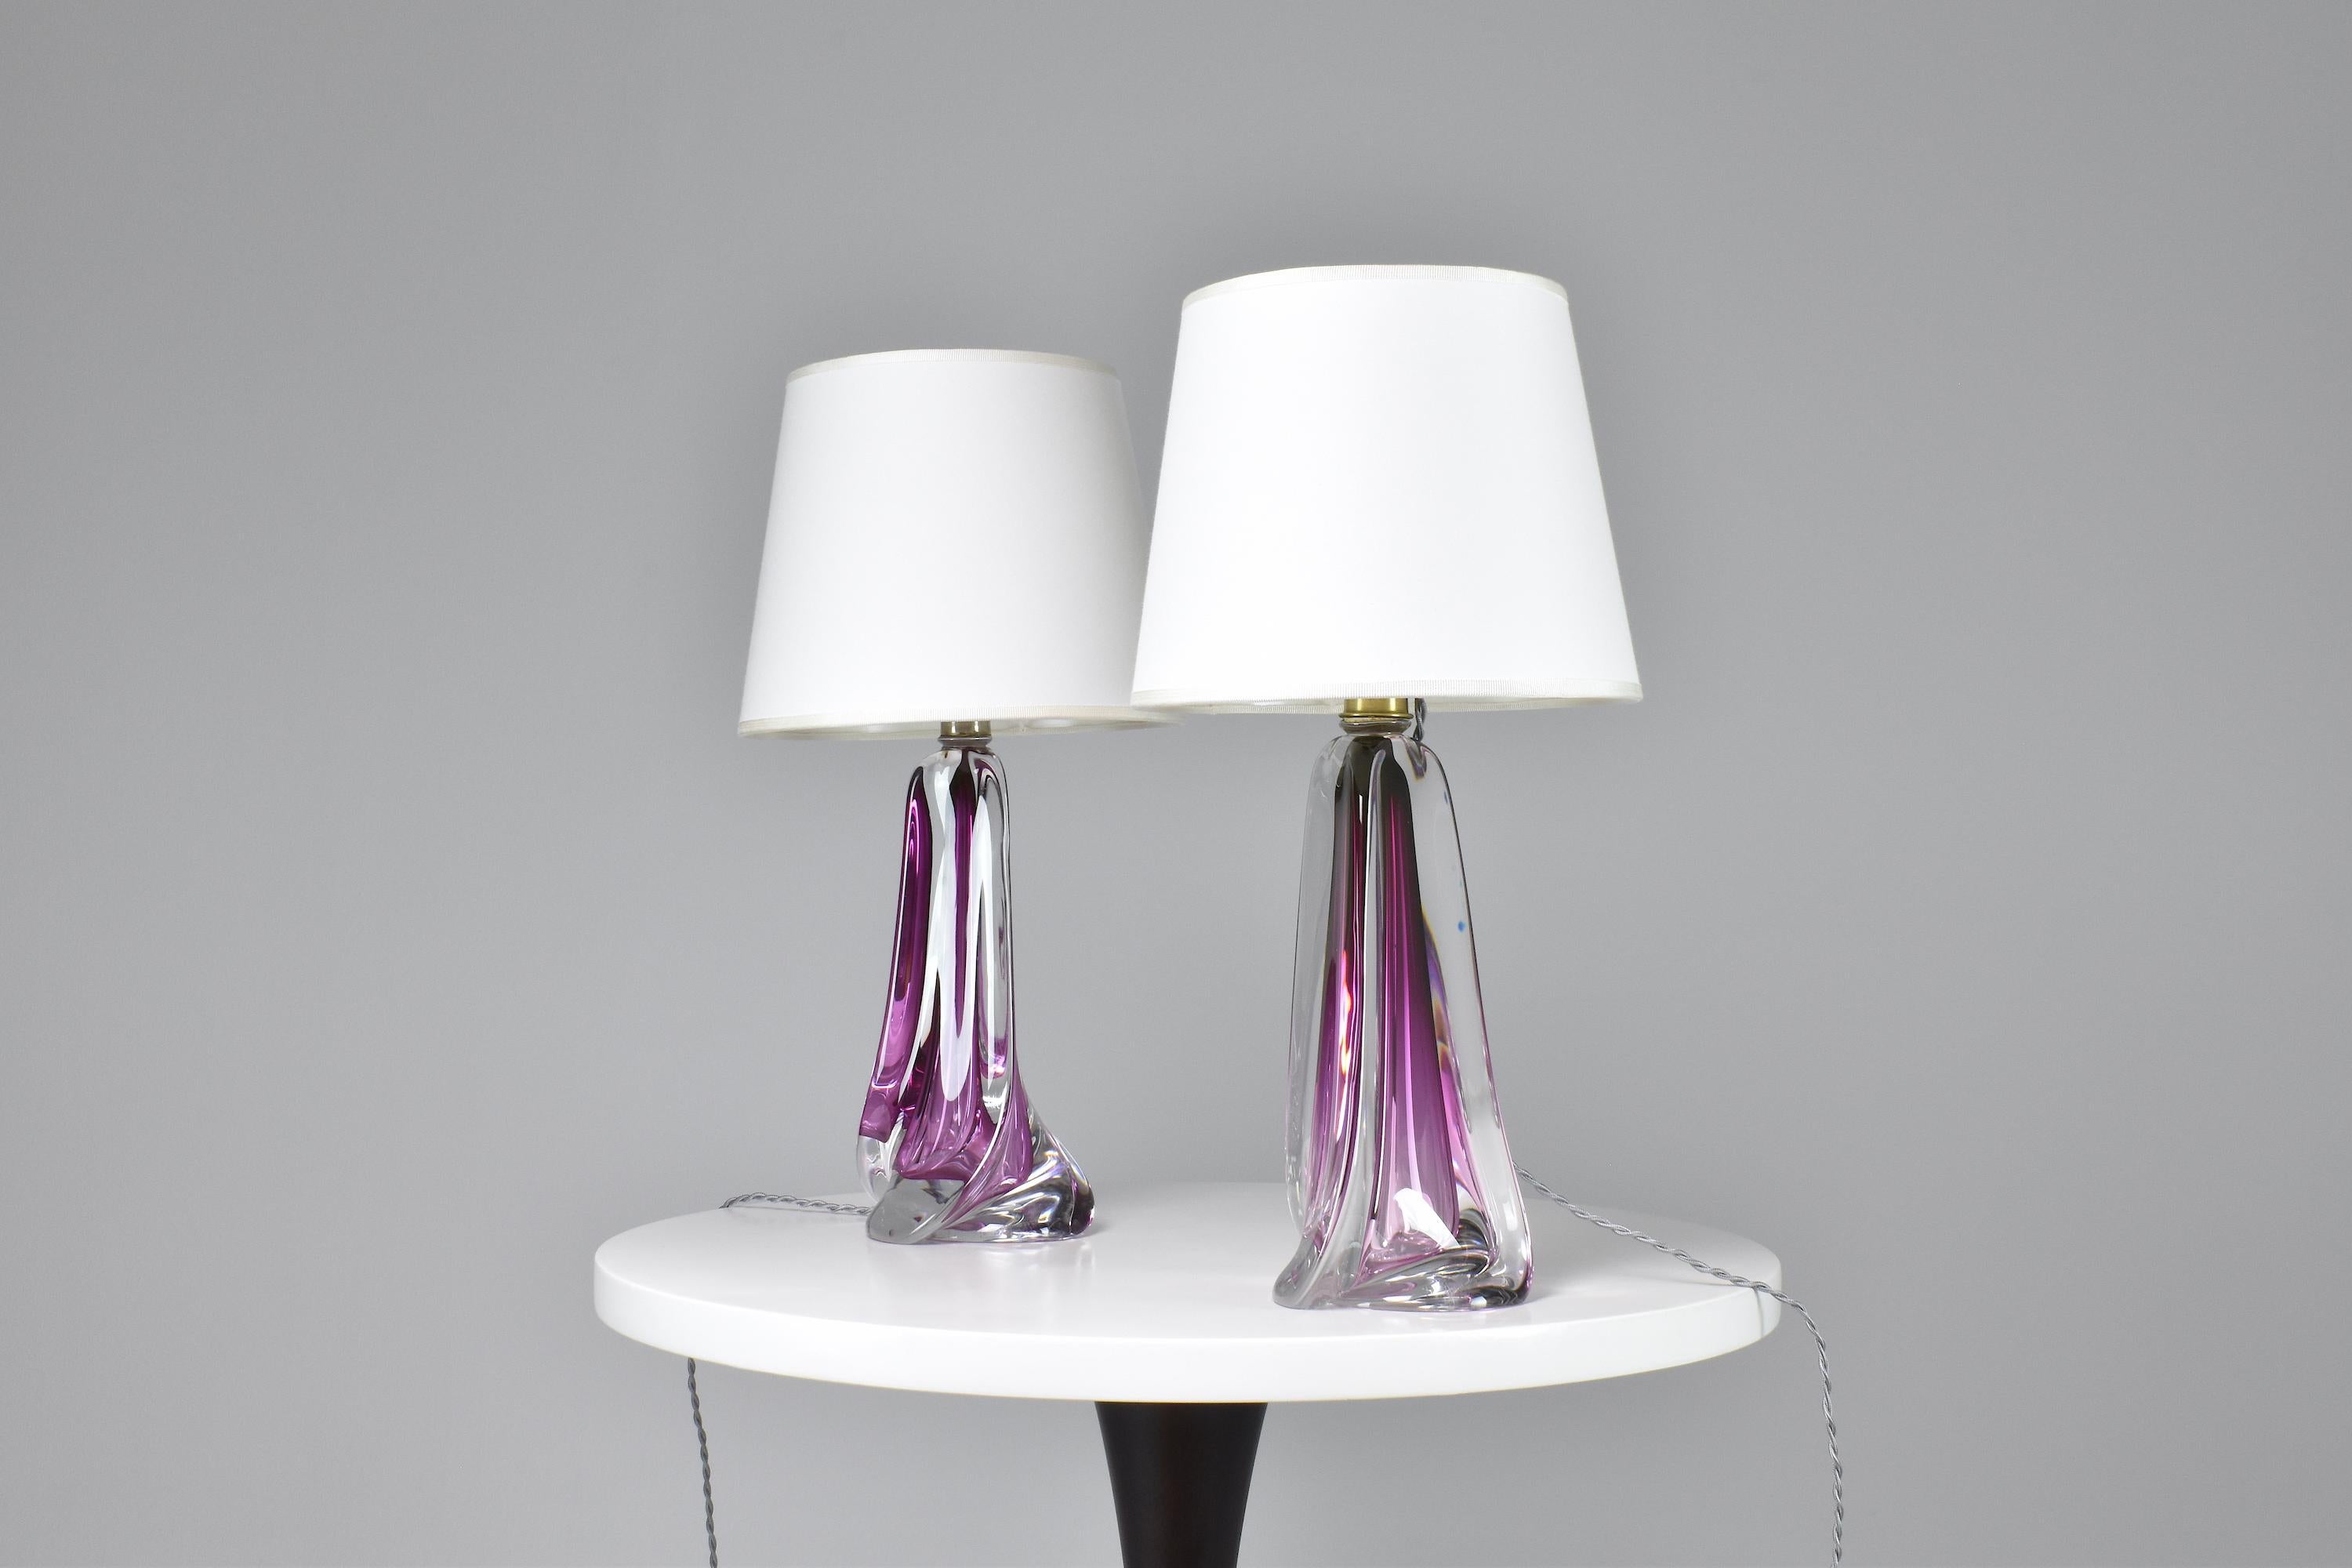 Stunning pair of Val Saint Lambert table lamps in purple crystal. These handcrafted pieces were made in Belgium in the '60s. The twisted crystal is hand-blown and holds the original label.

----

We are an exhibition space and an online